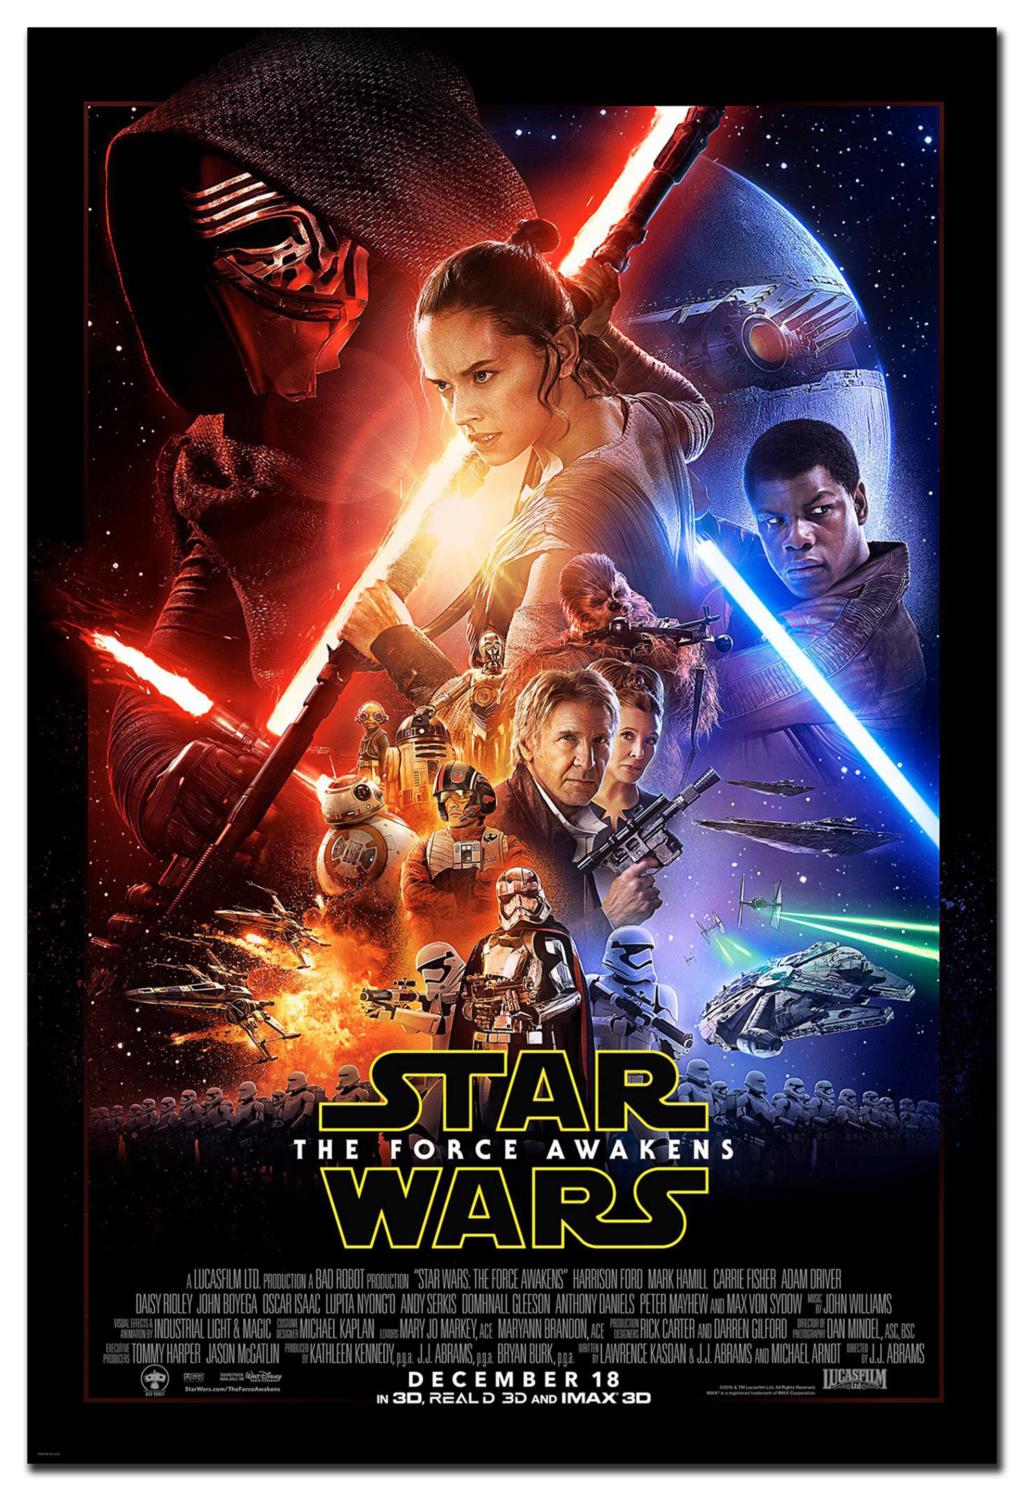 Star Wars Ep. VII: The Force Awakens for android download